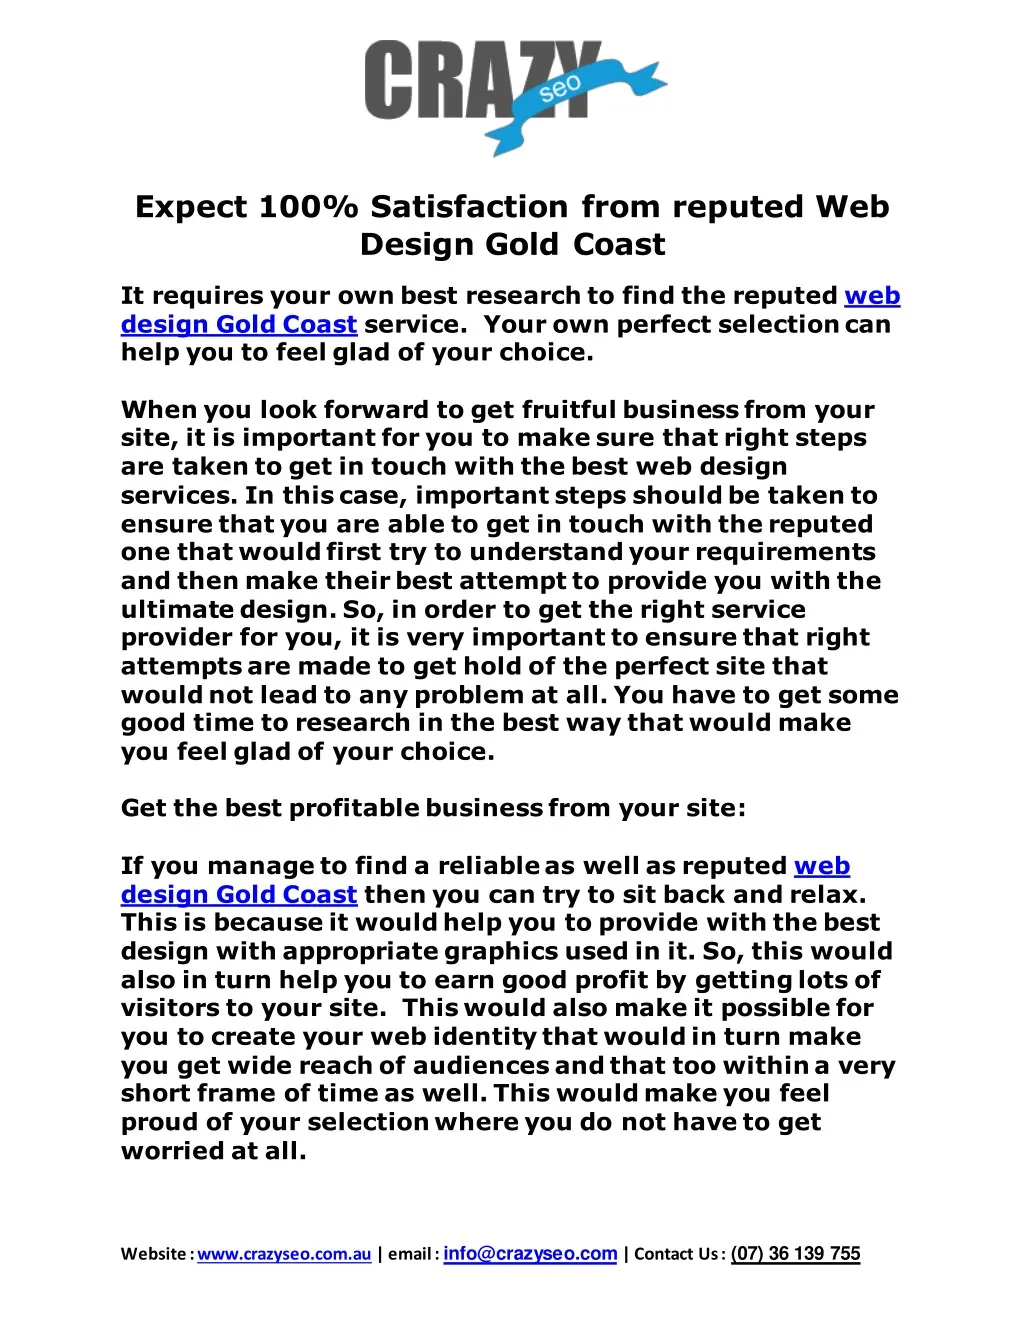 expect 100 satisfaction from reputed web design